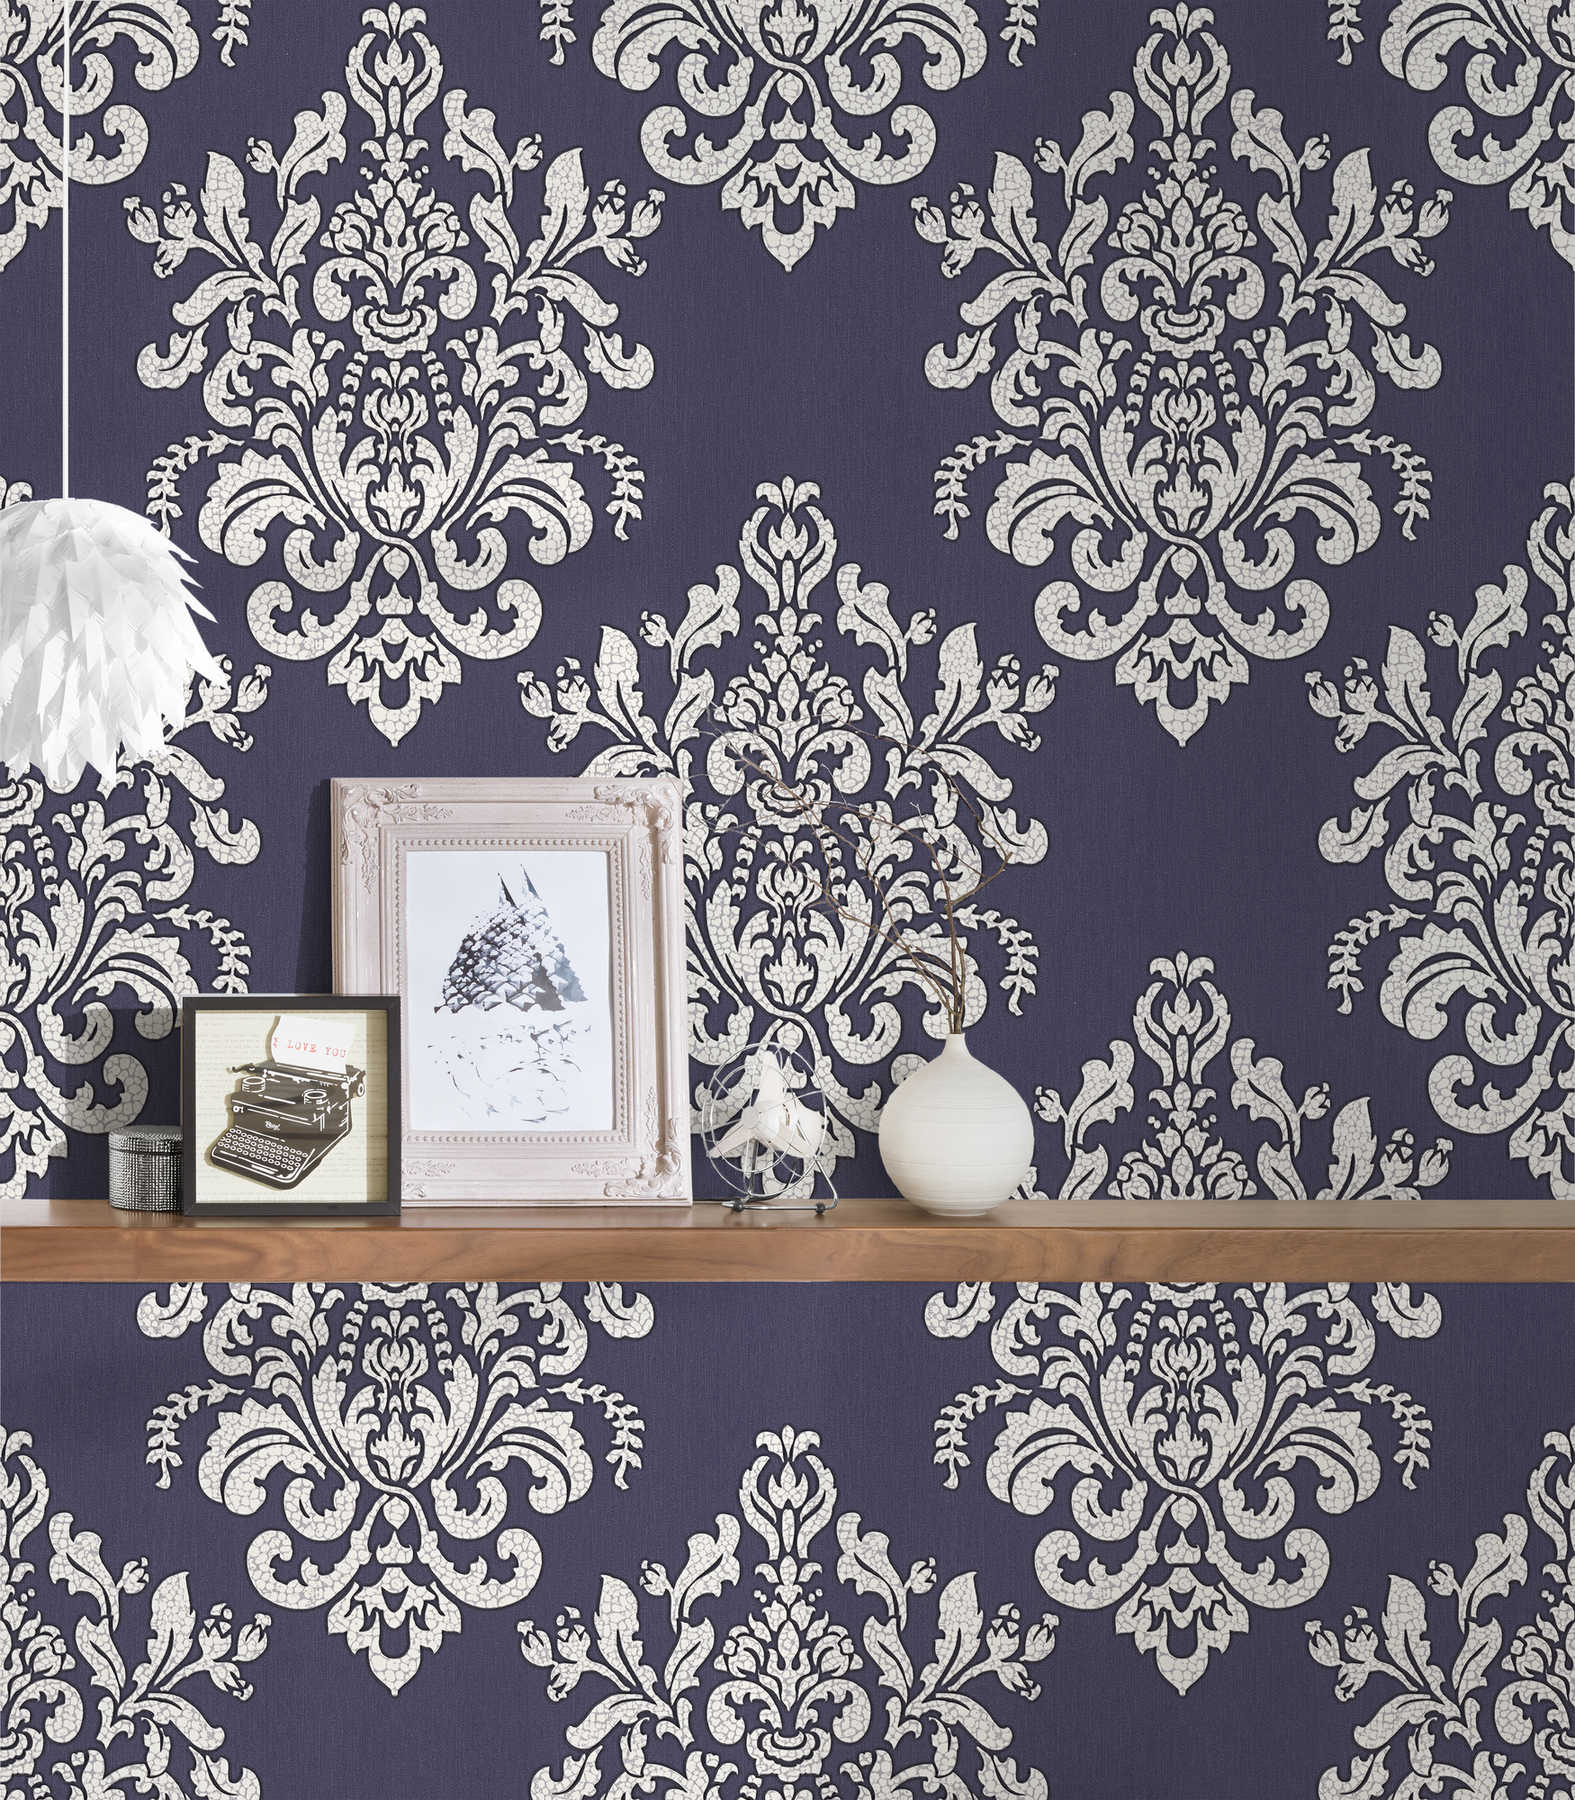             Ornament wallpaper with crackle effect - metallic, purple
        